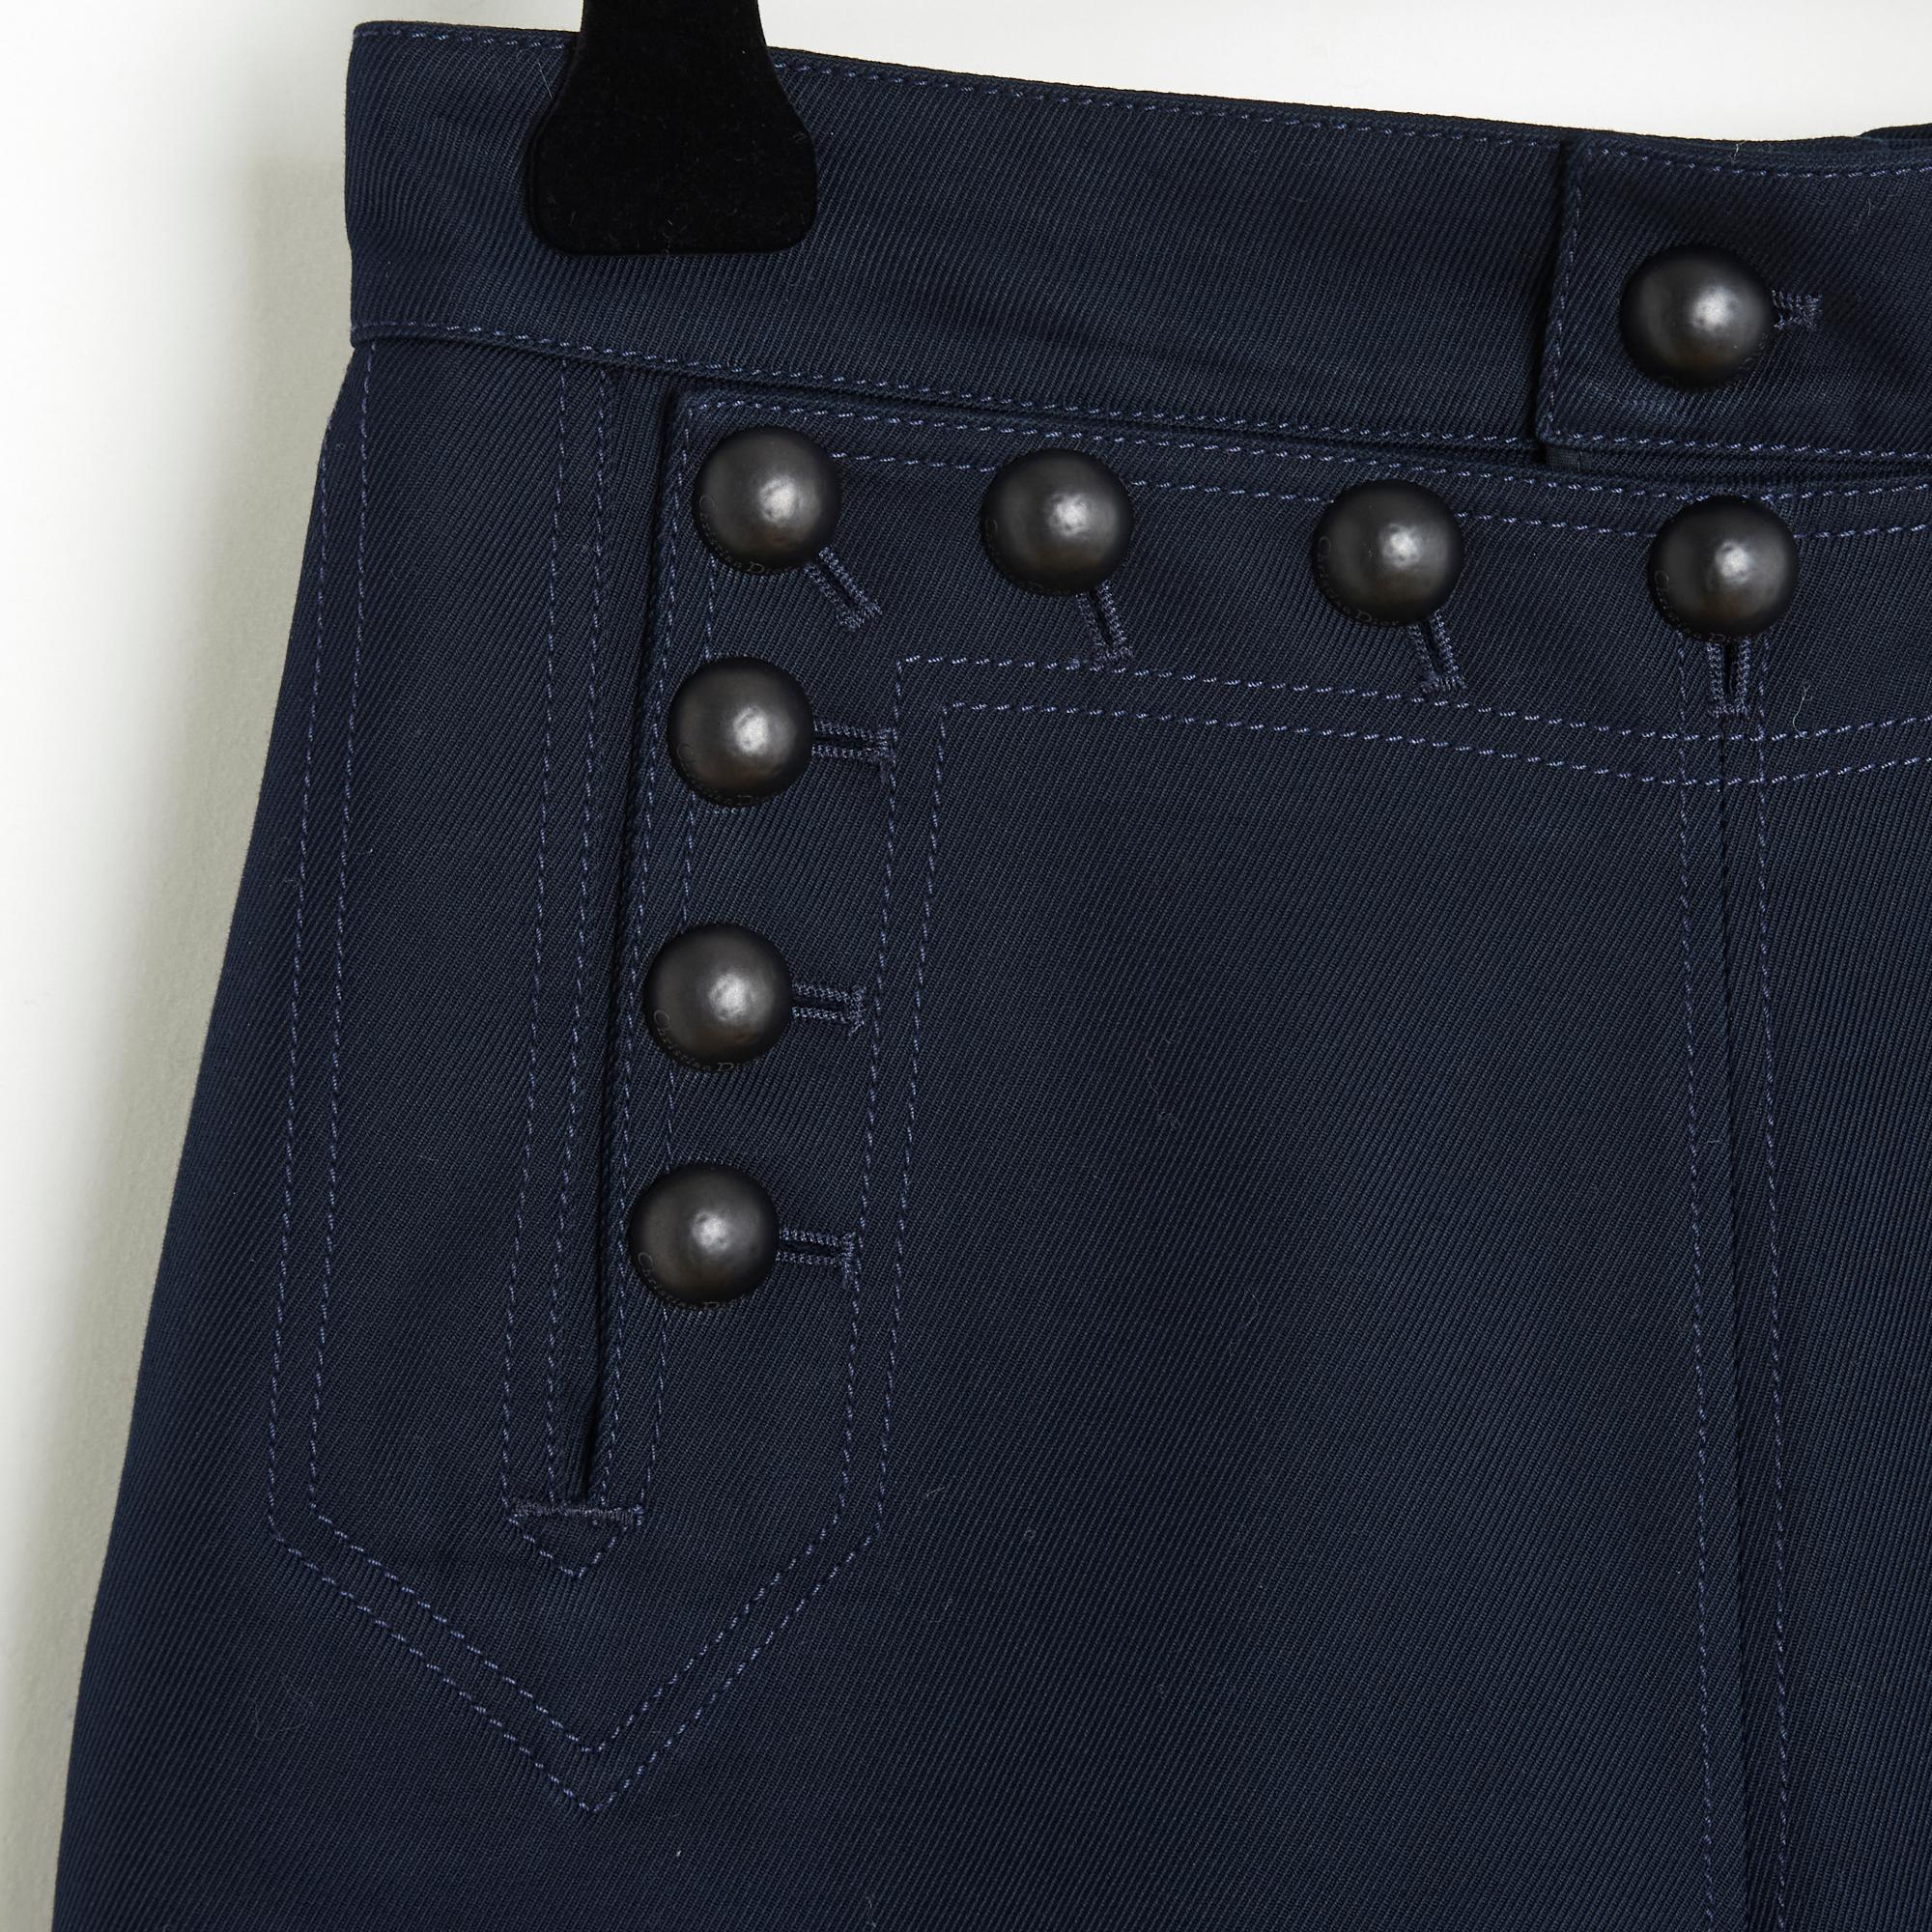 Christian Dior navy style pants with 